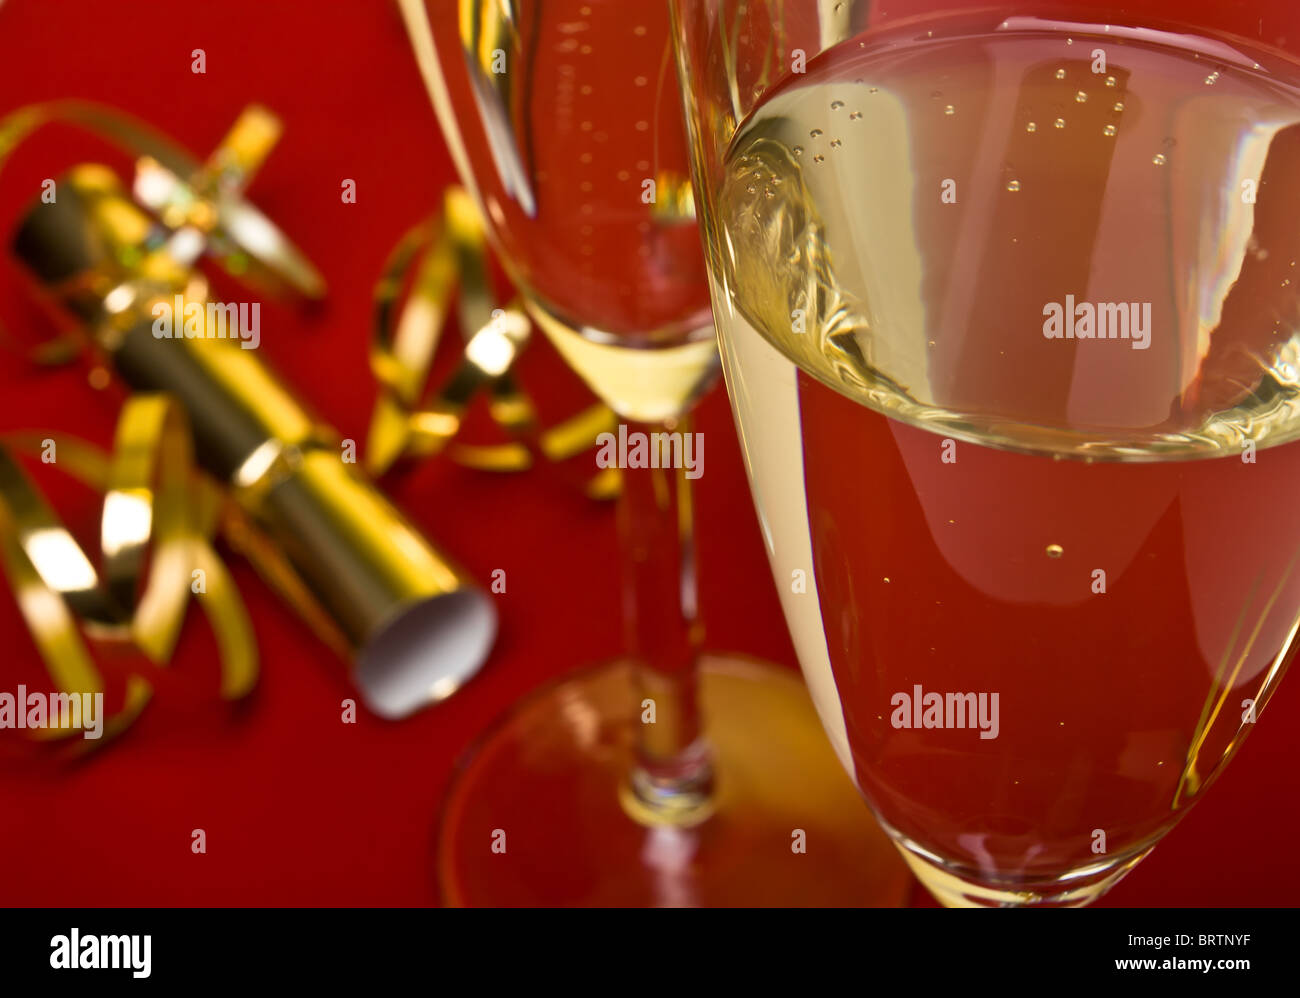 Festive celebration concept of champagne, ribbons and crackers under a golden light. Stock Photo